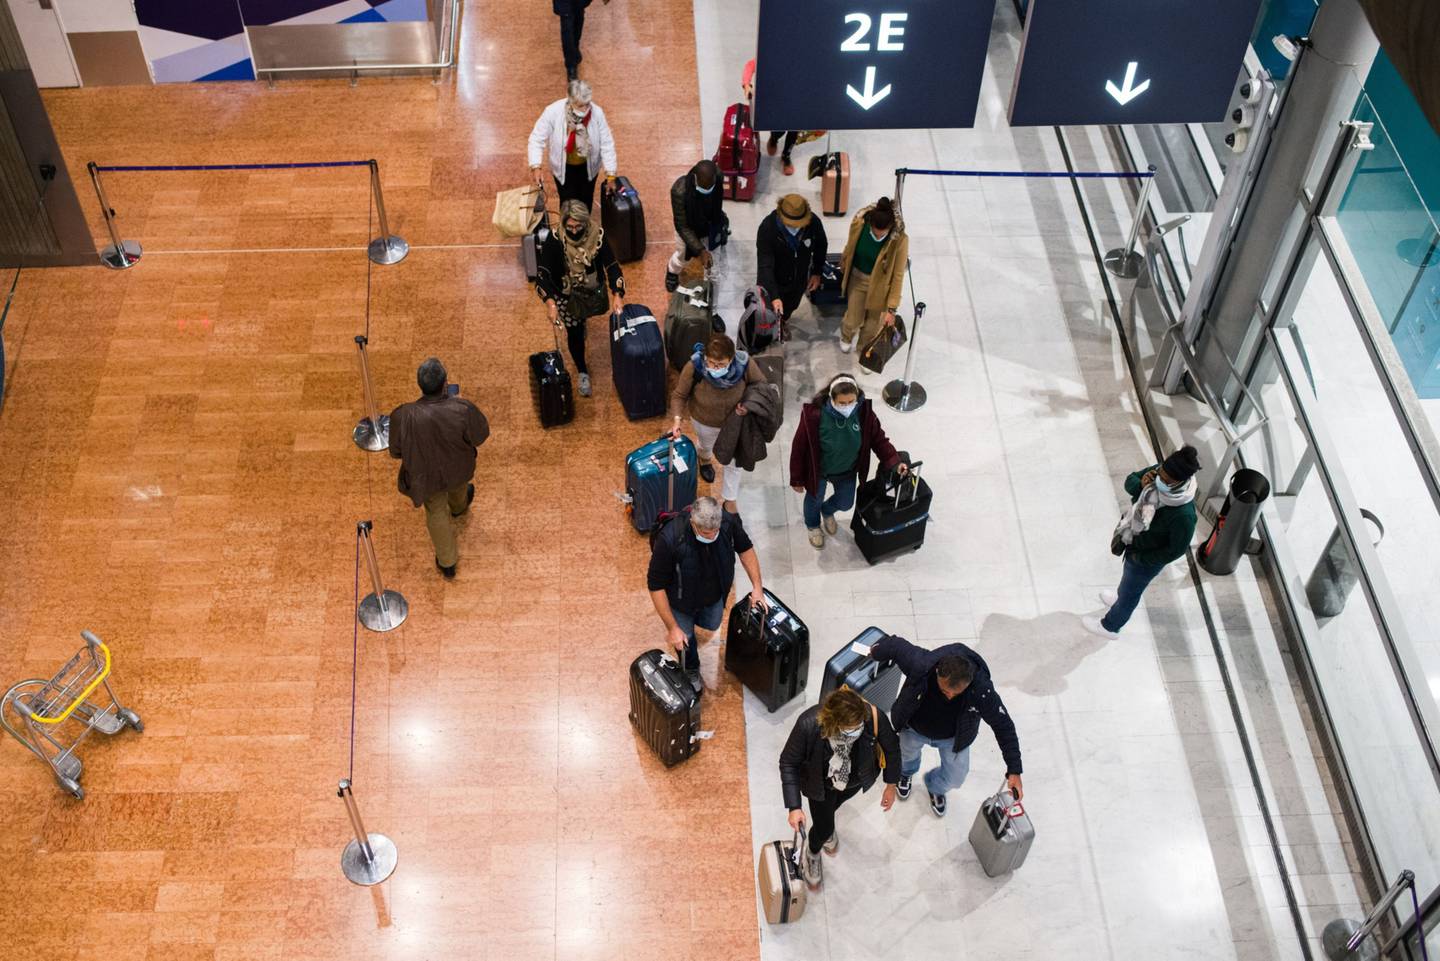 Travelers are turning to insurance to counter the risk of quarantines and restrictions.